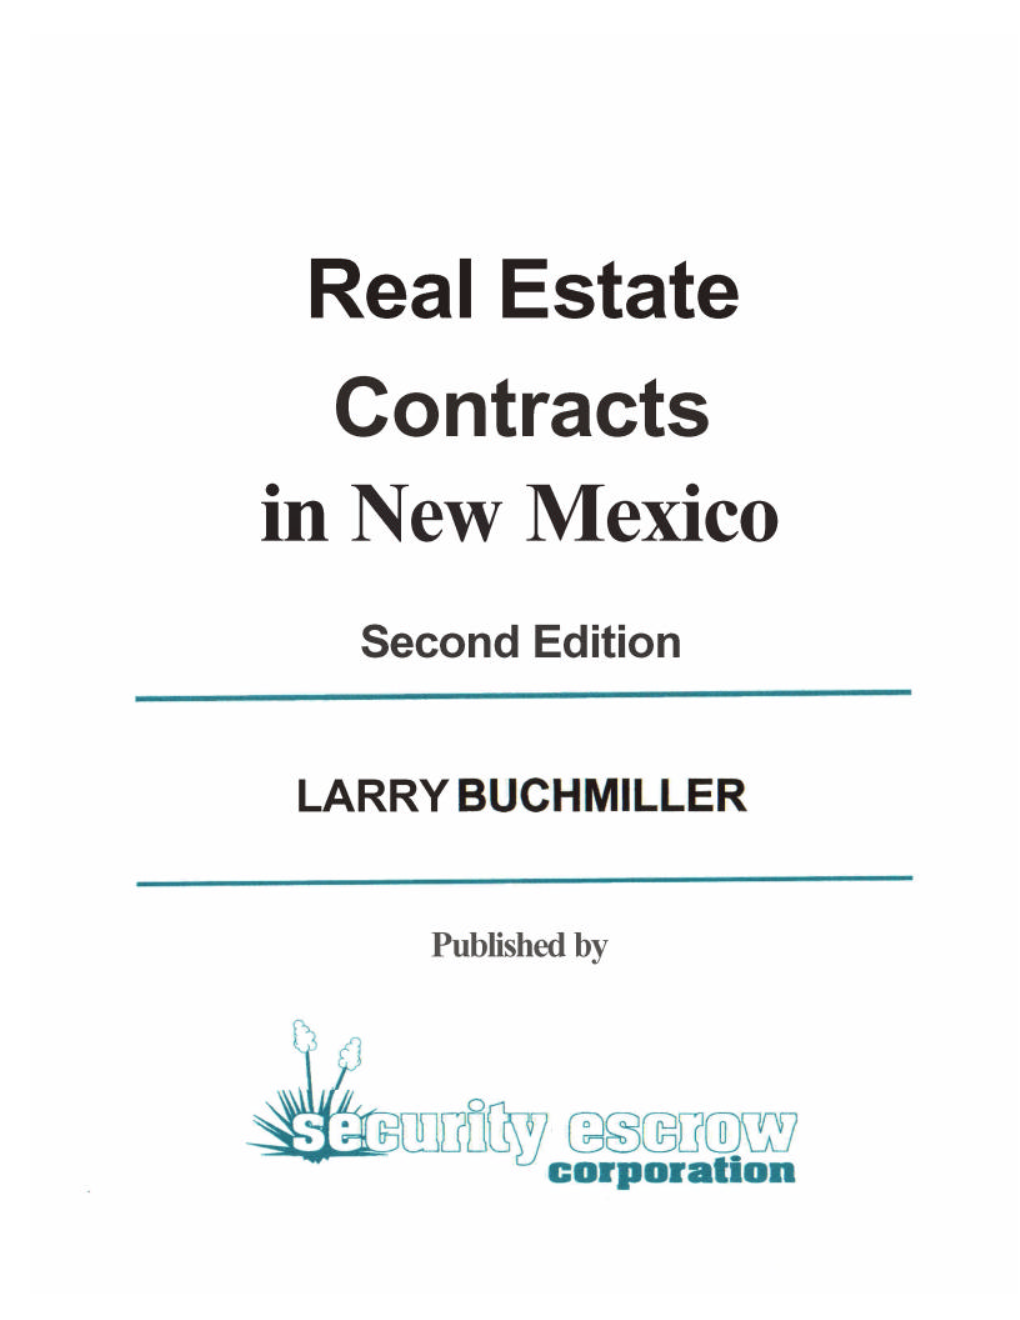 Real Estate Contracts in New Mexico